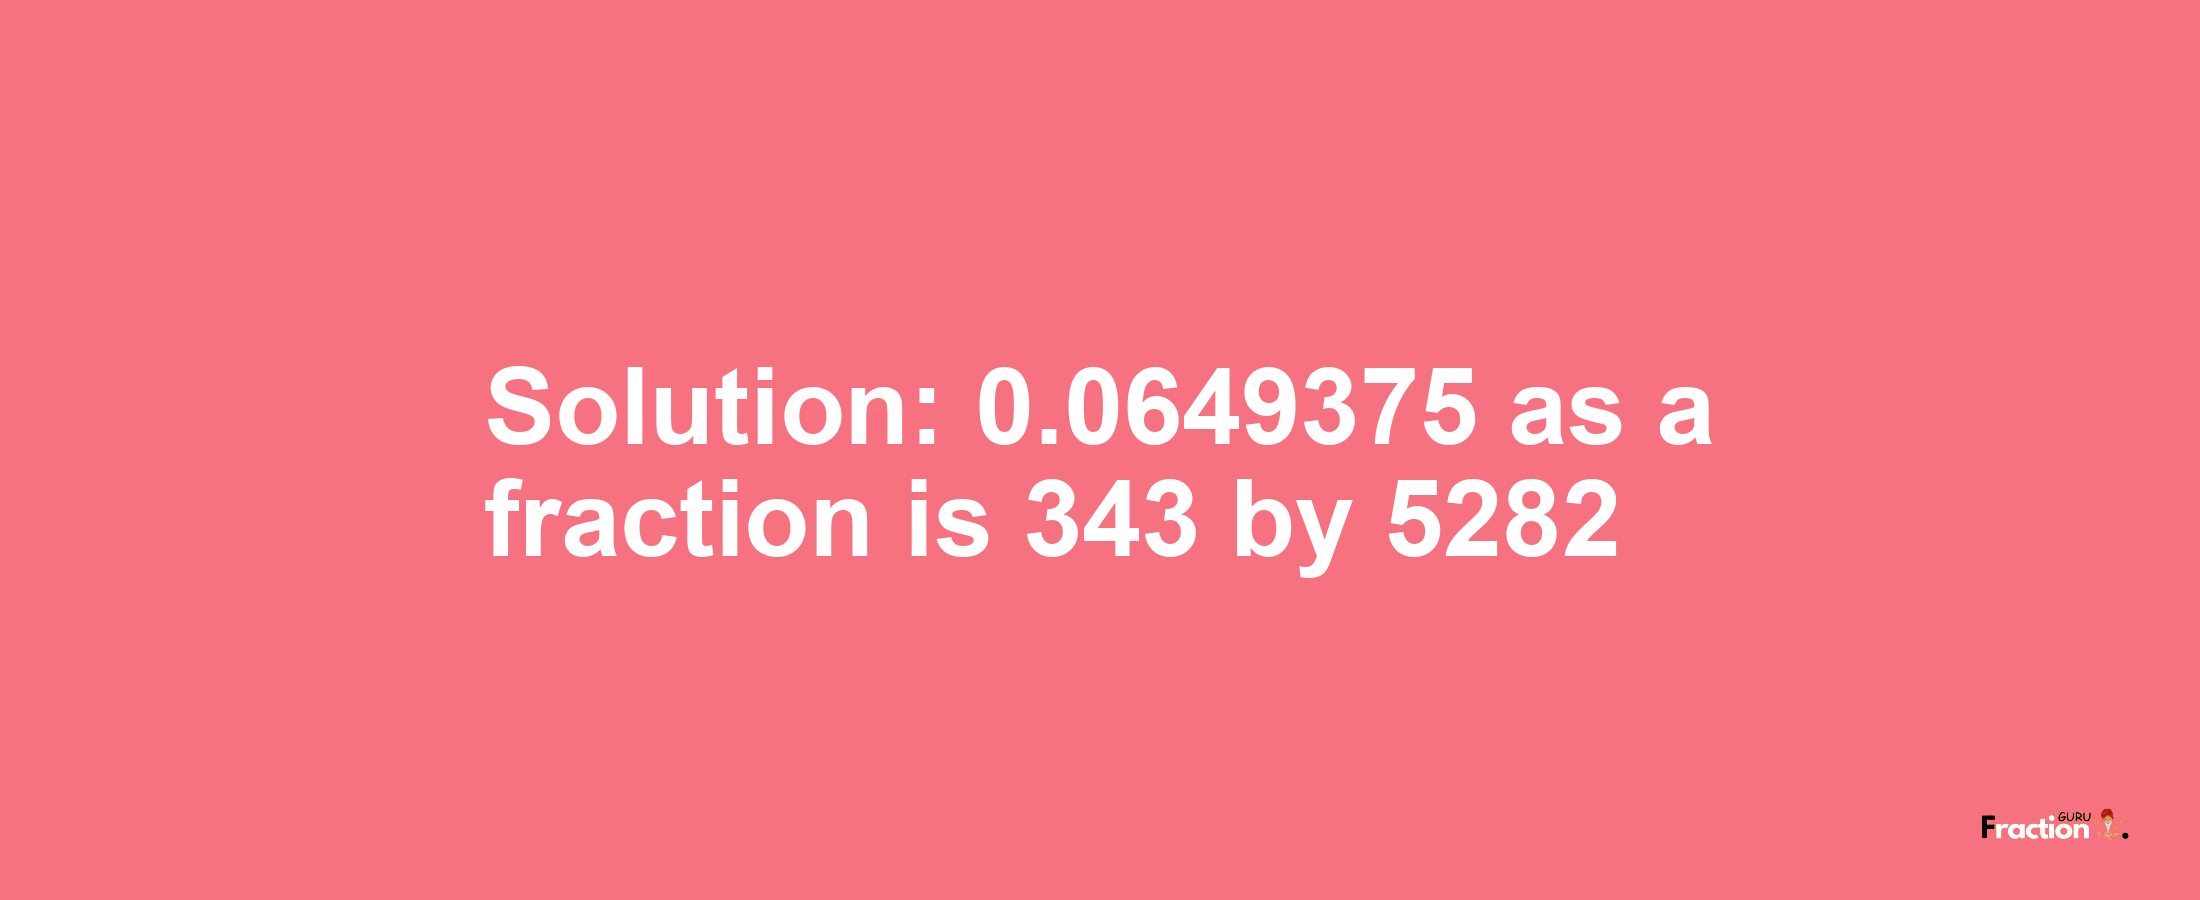 Solution:0.0649375 as a fraction is 343/5282